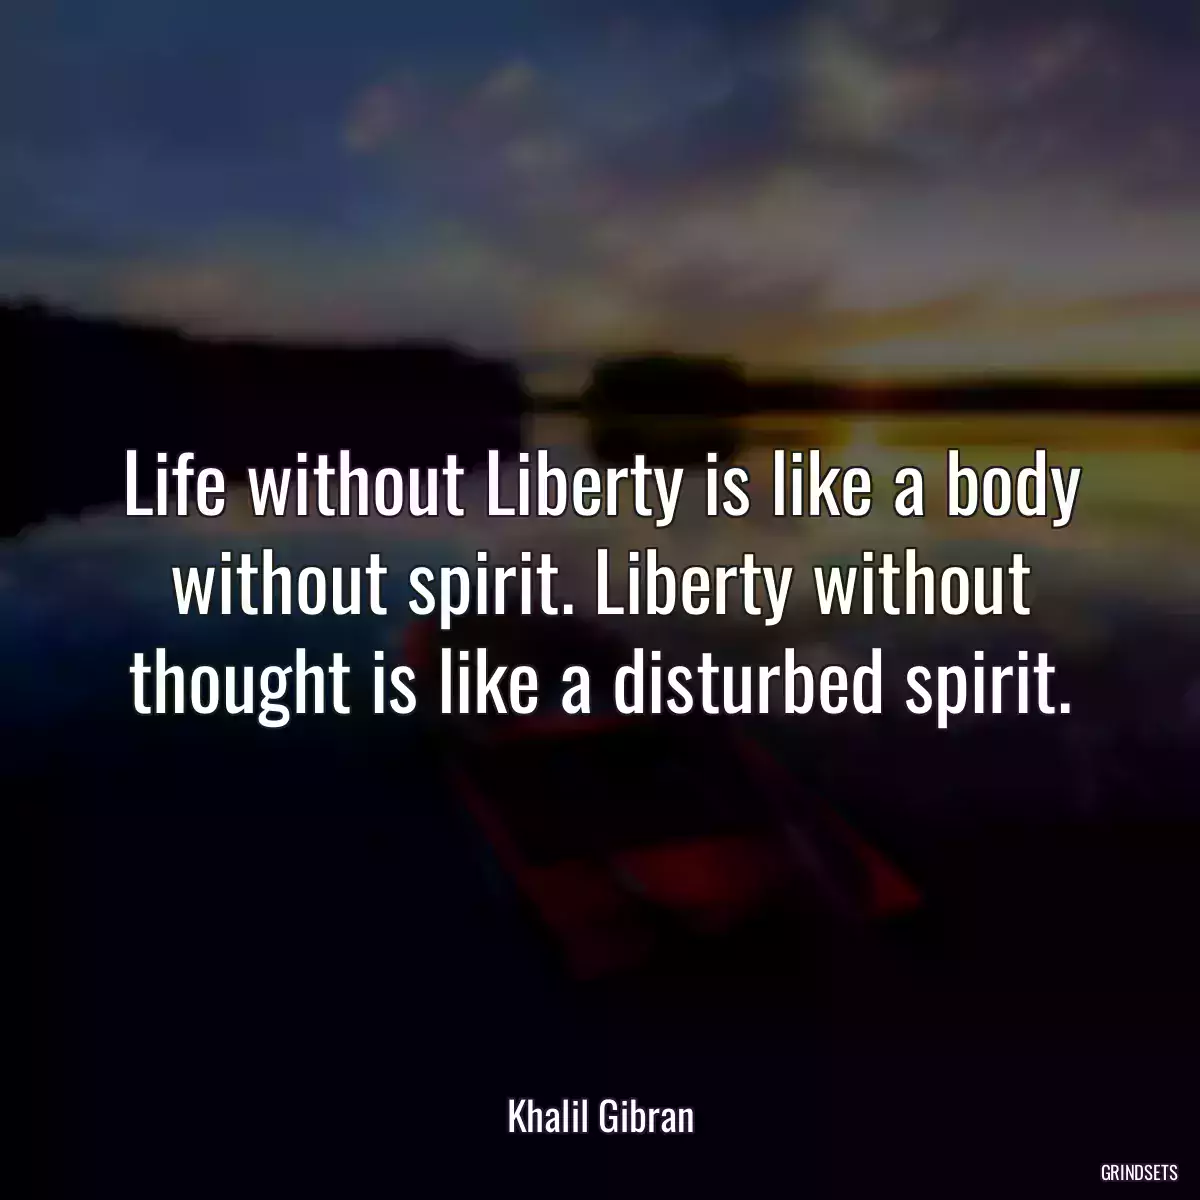 Life without Liberty is like a body without spirit. Liberty without thought is like a disturbed spirit.